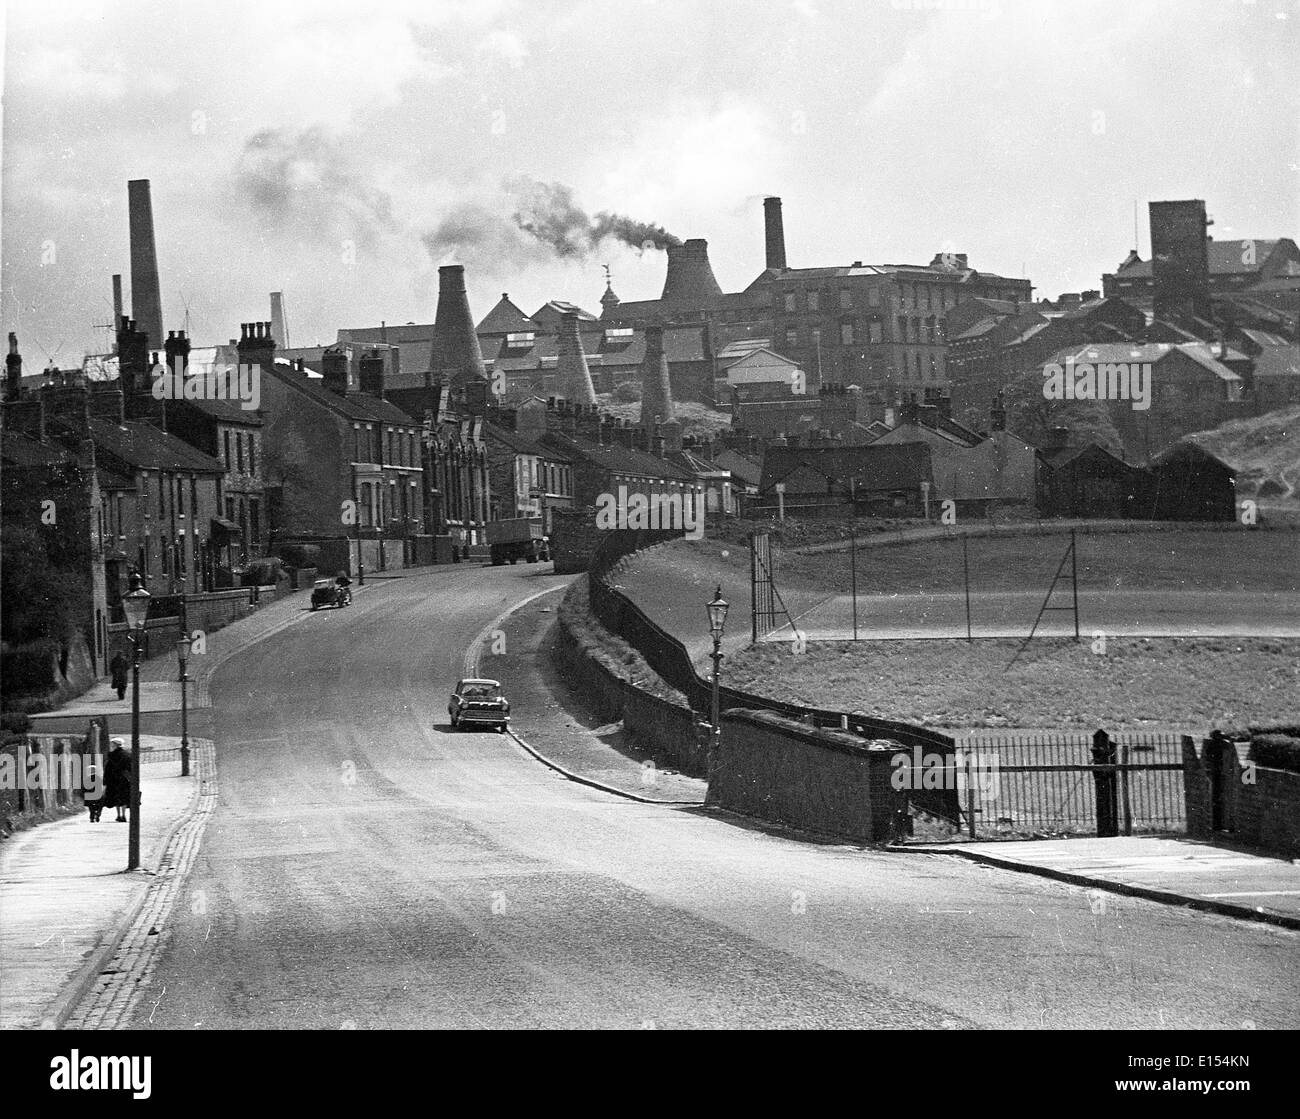 The Potteries in Stoke on Trent 1950s industrial Britain Uk Stock Photo